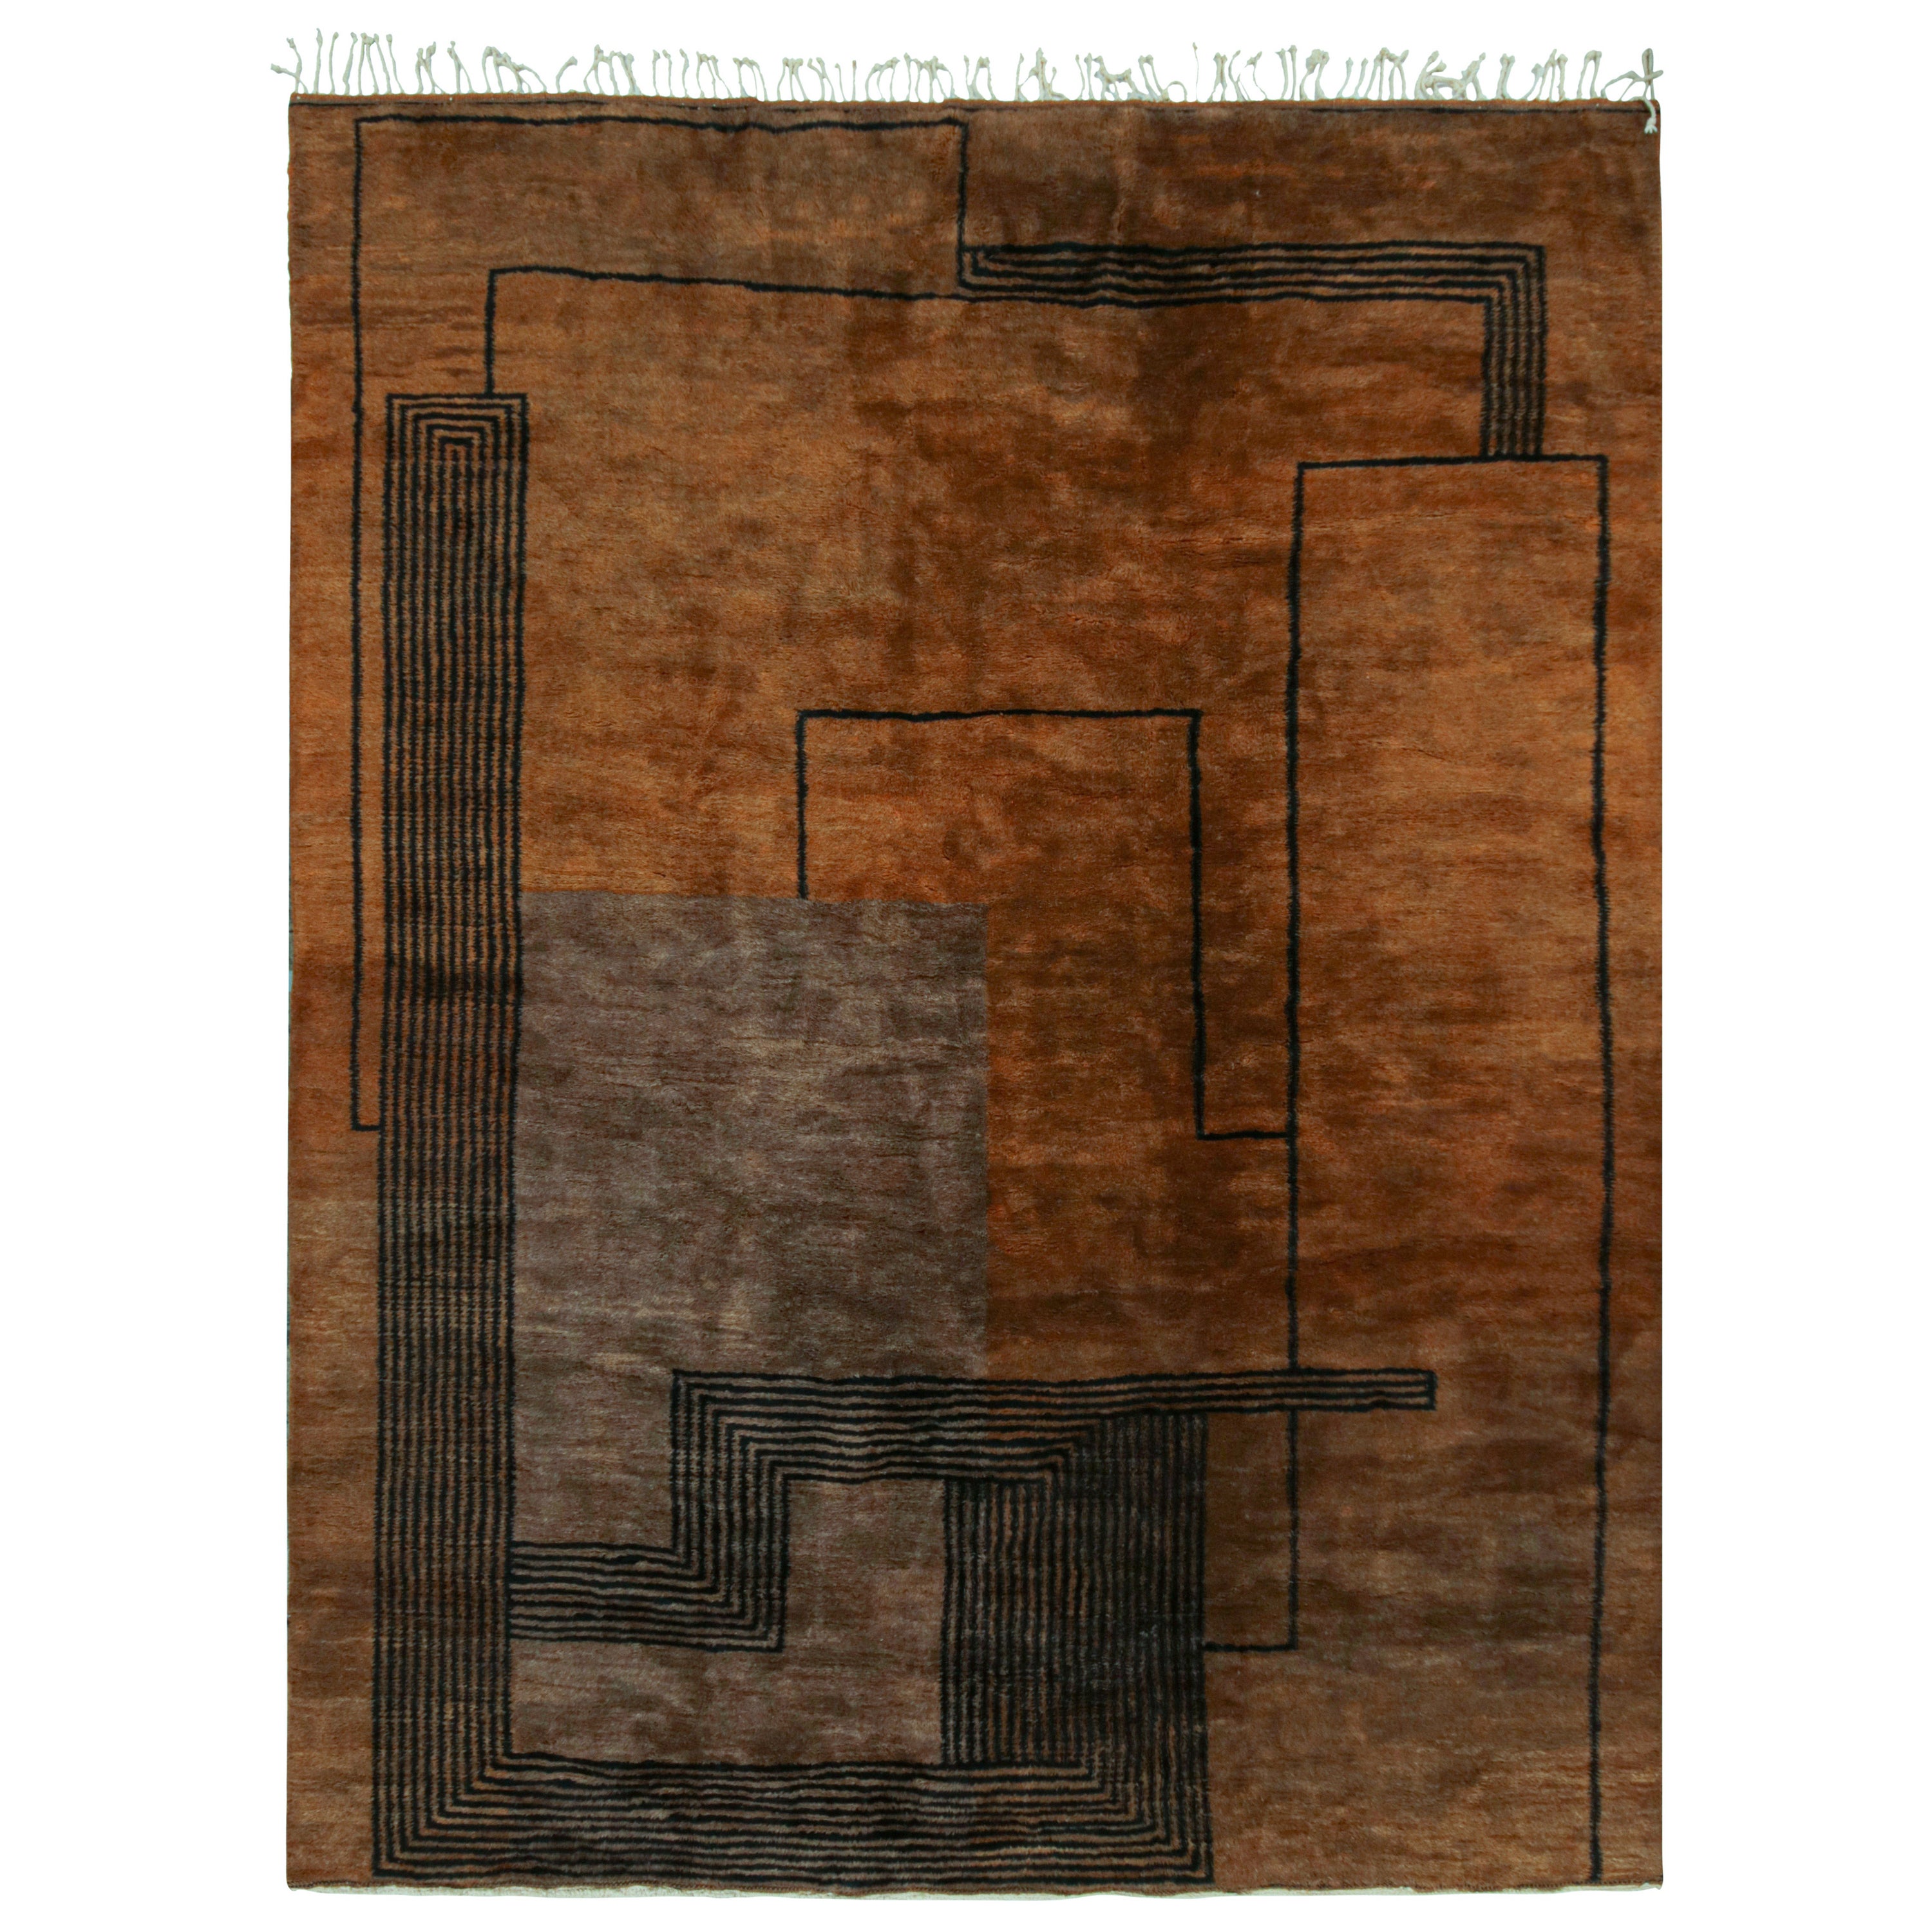 Rug & Kilim’s Moroccan Rug in Brown with Black Art Deco style Geometric Pattern